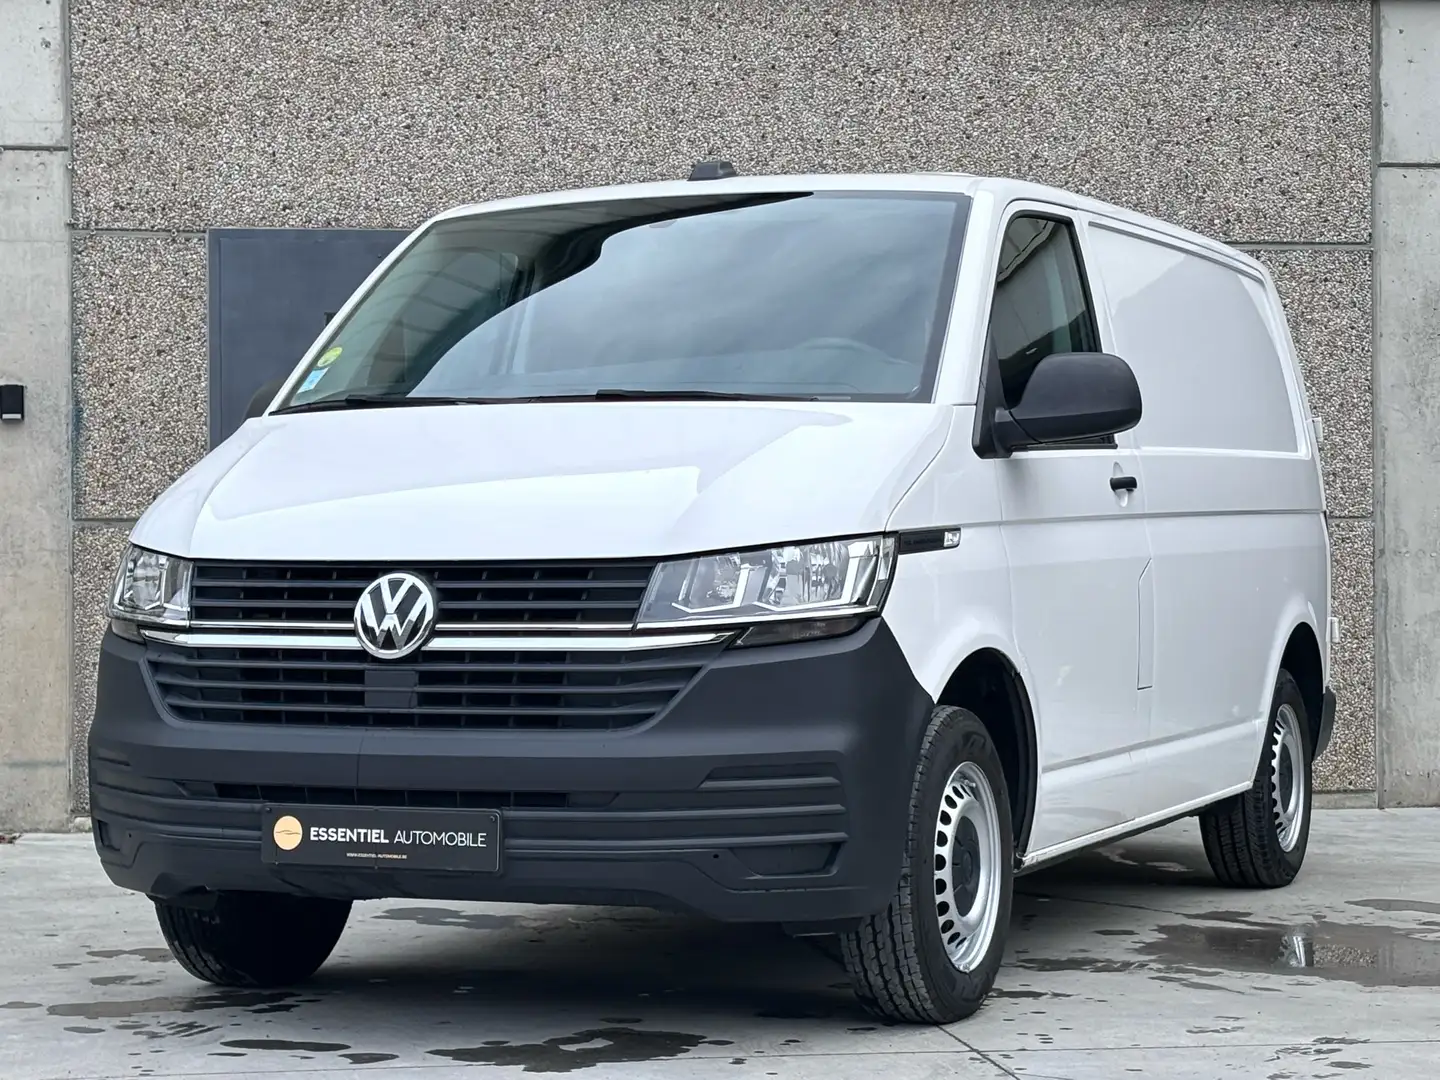 Volkswagen T6.1 Transporter 2.0 TDi 3 places - Uilitaire - TVA déductible Wit - 1